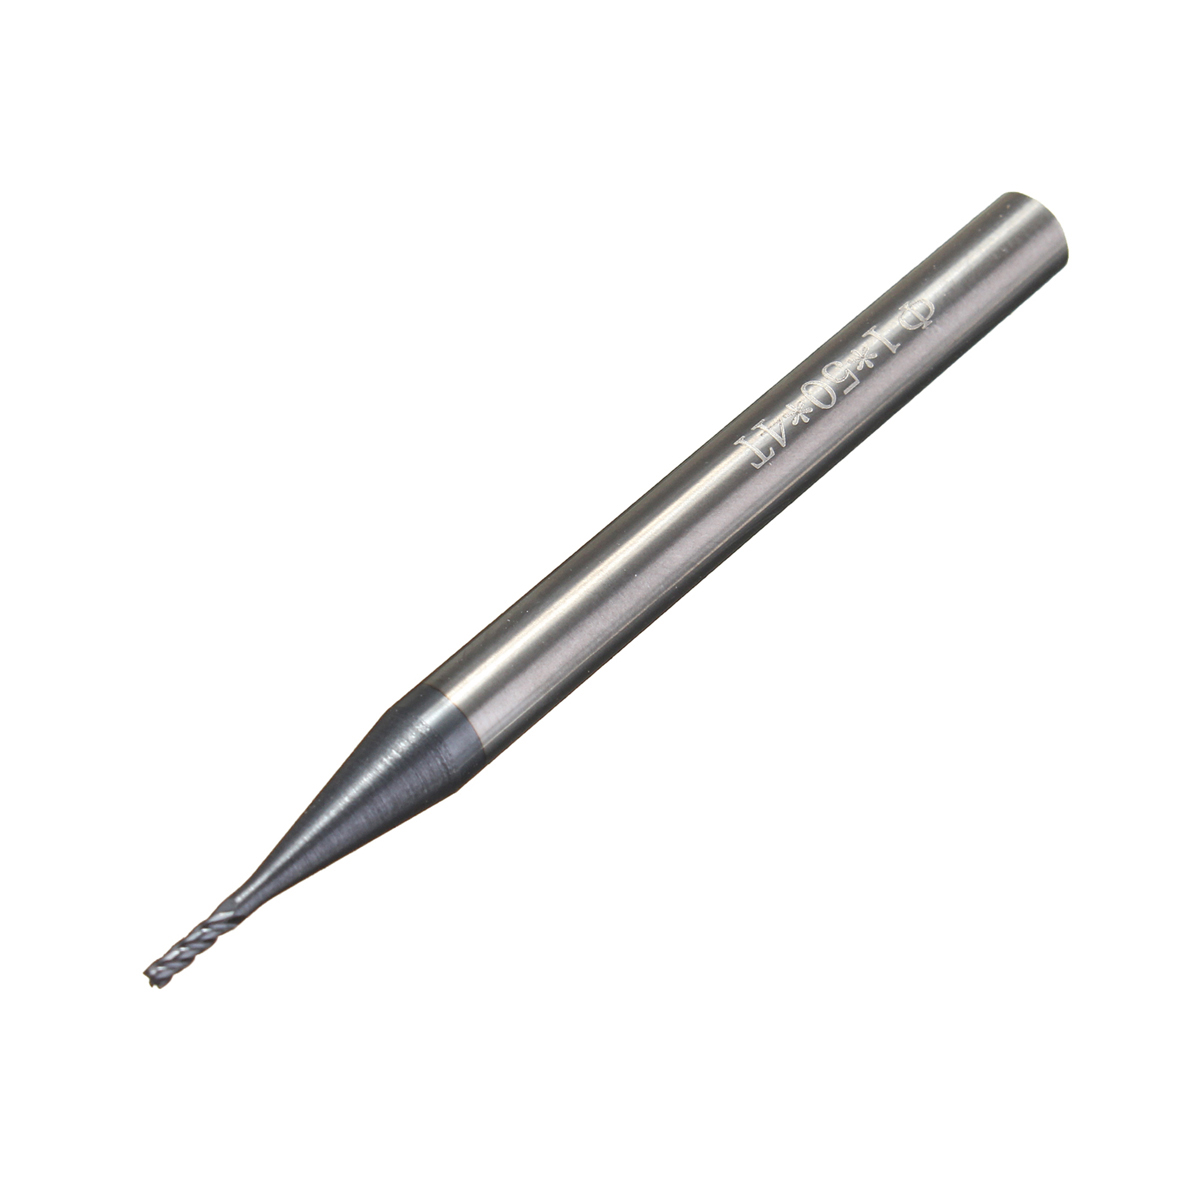 Drillpro-1mm-4-Flutes-End-Mill-Cutter-50mm-Length-Tungsten-Carbide-Milling-Cutter-CNC-Tool-1516233-5